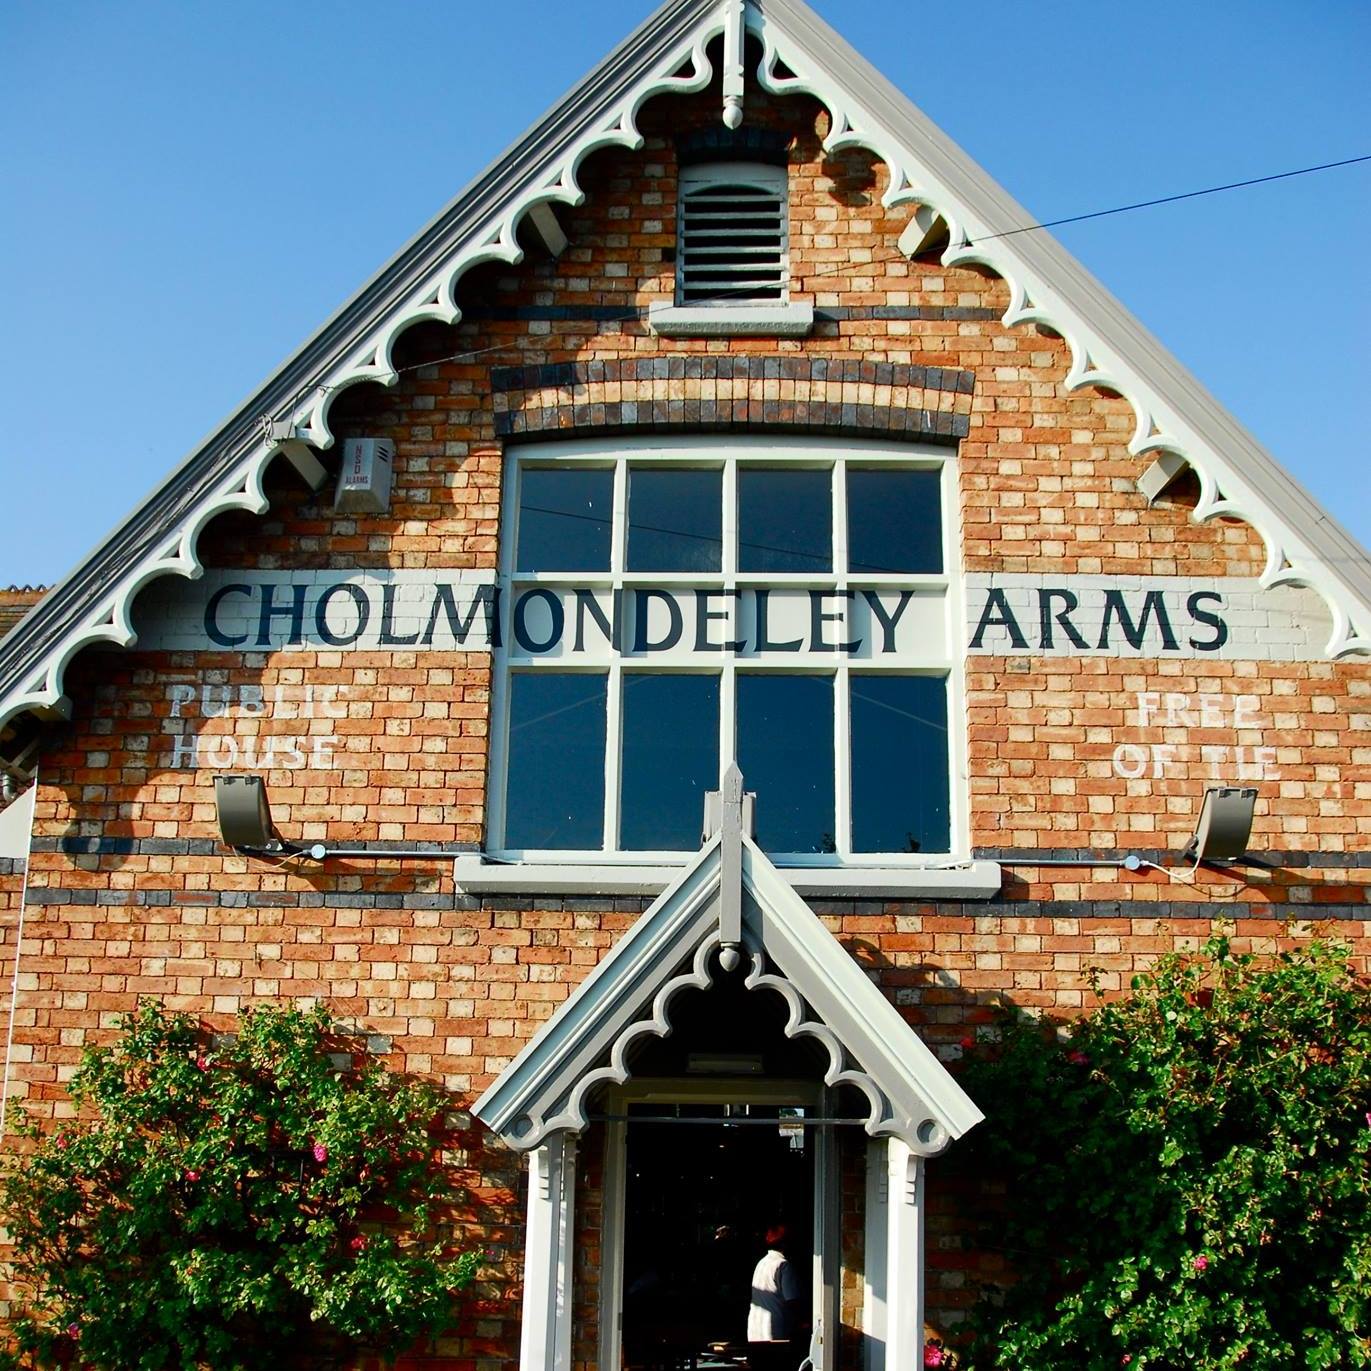 The Cholmondely Arms in Cheshire has been named the best pub in Britain. Credit; Facebook